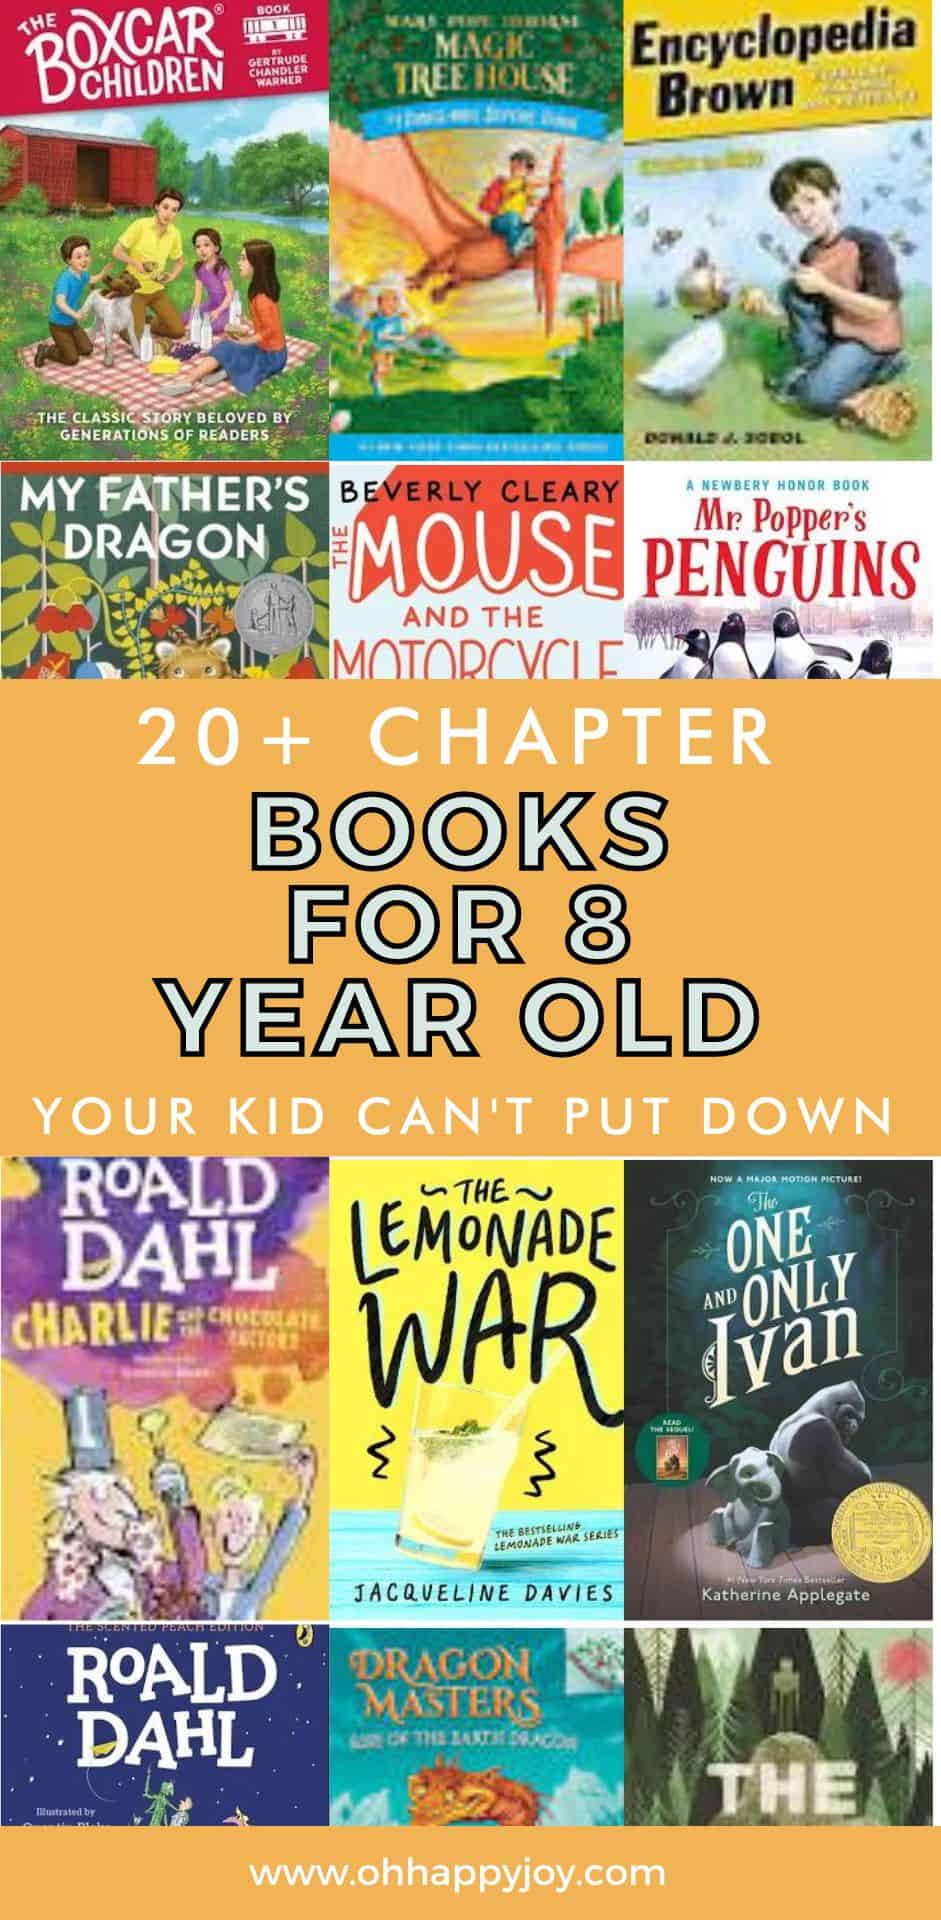 BEST BOOKS FOR 8 YEAR OLDS